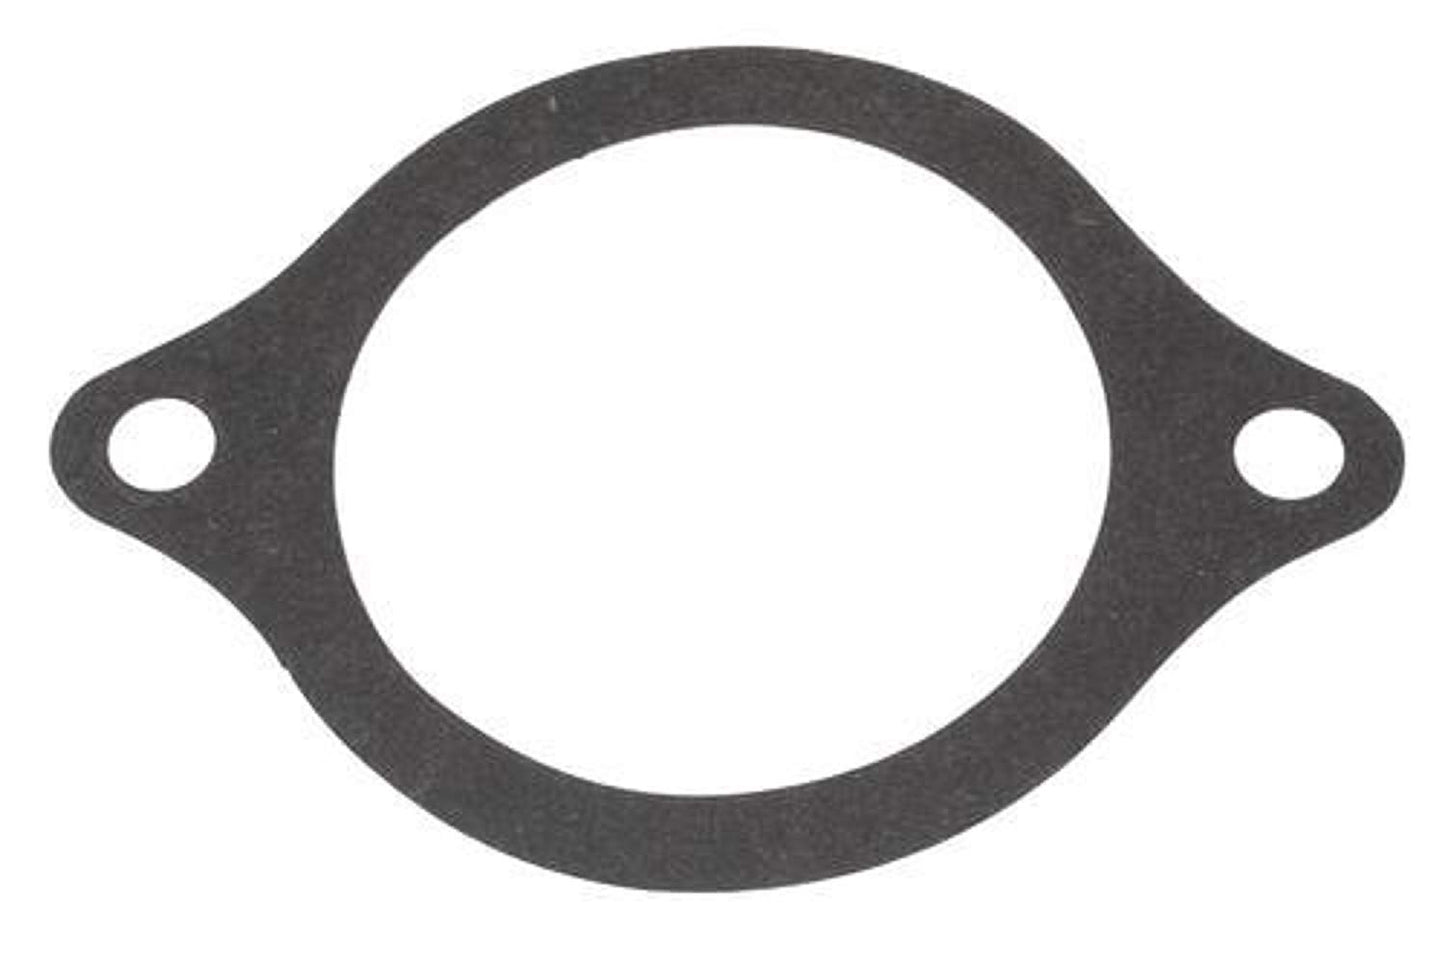 Replacement Governor Housing Gasket for Ford #9N6022 Fits 2N 8N 9N (QTY OF 1) - A-9N6022,1